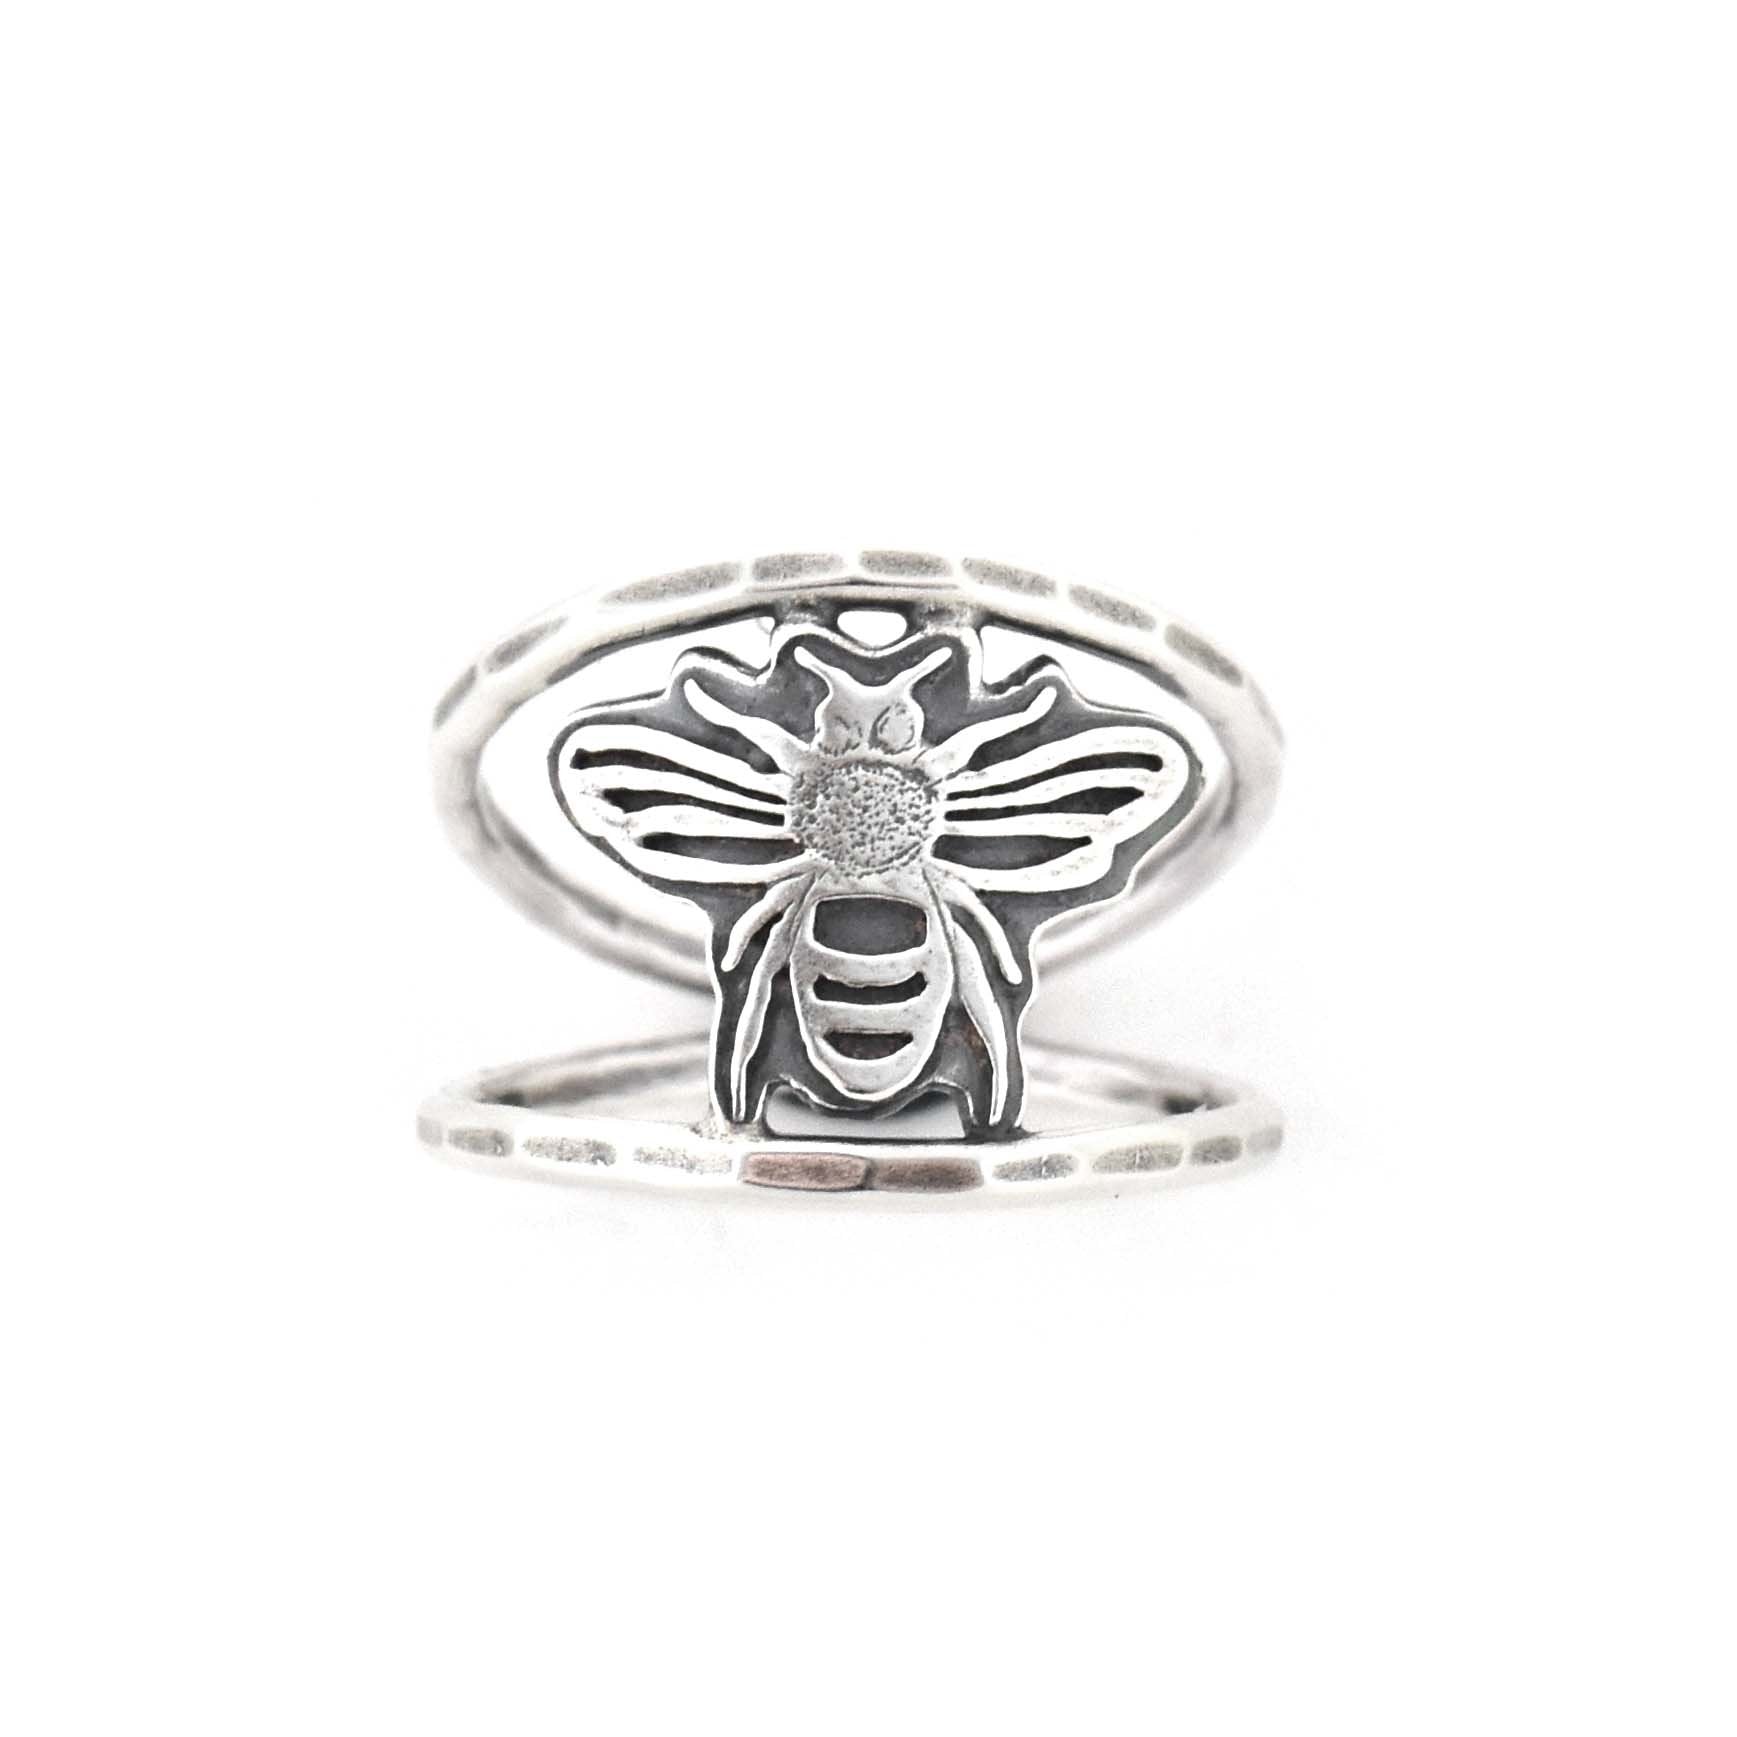 Honey Bee Ring - Ring Select Size 4 5604 - handmade by Beth Millner Jewelry